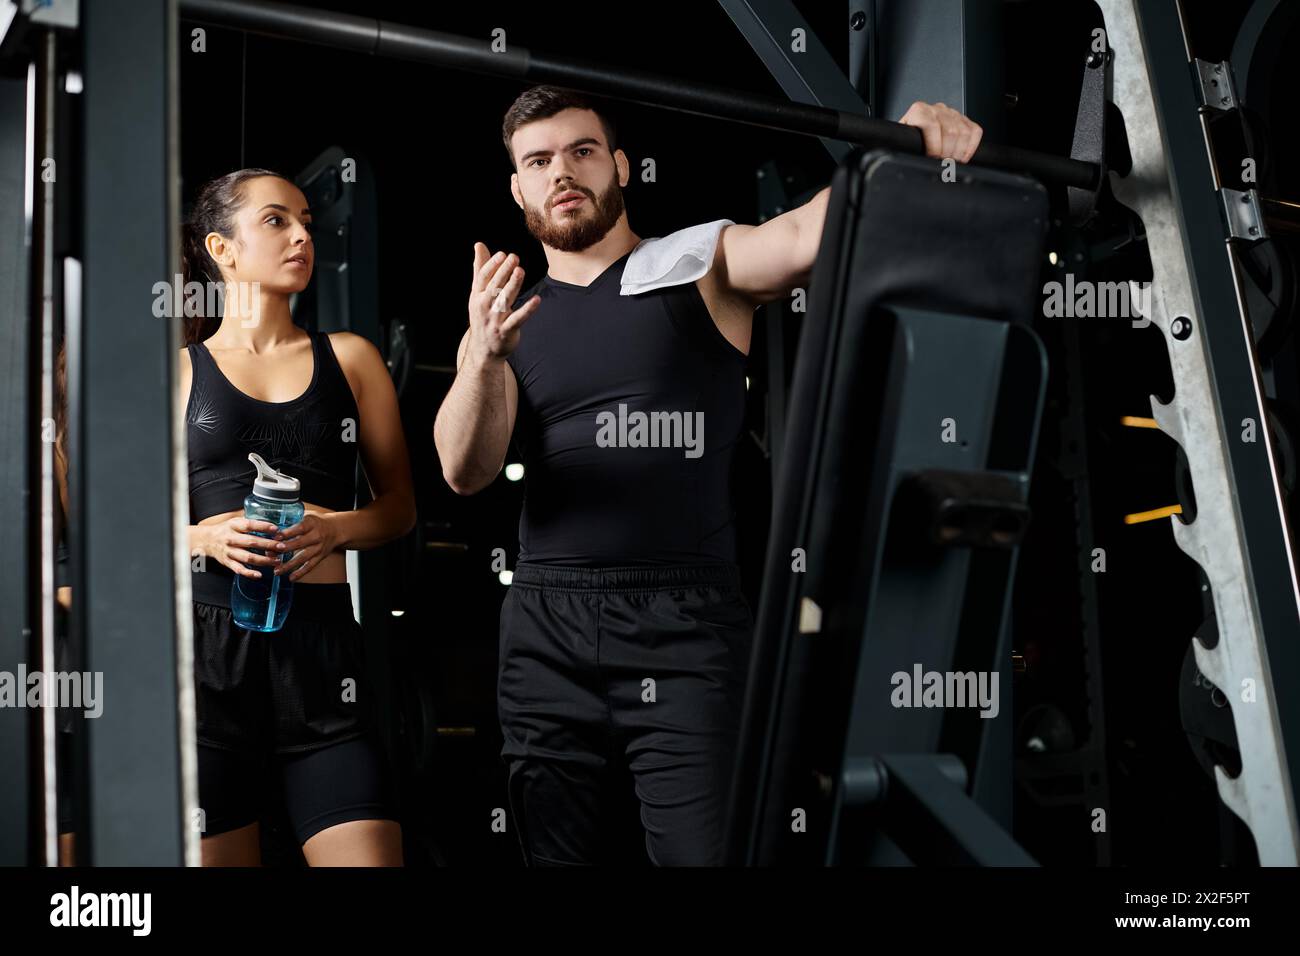 A male personal trainer stands next to a brunette sportswoman in a gym, motivating and guiding her through a workout session. Stock Photo